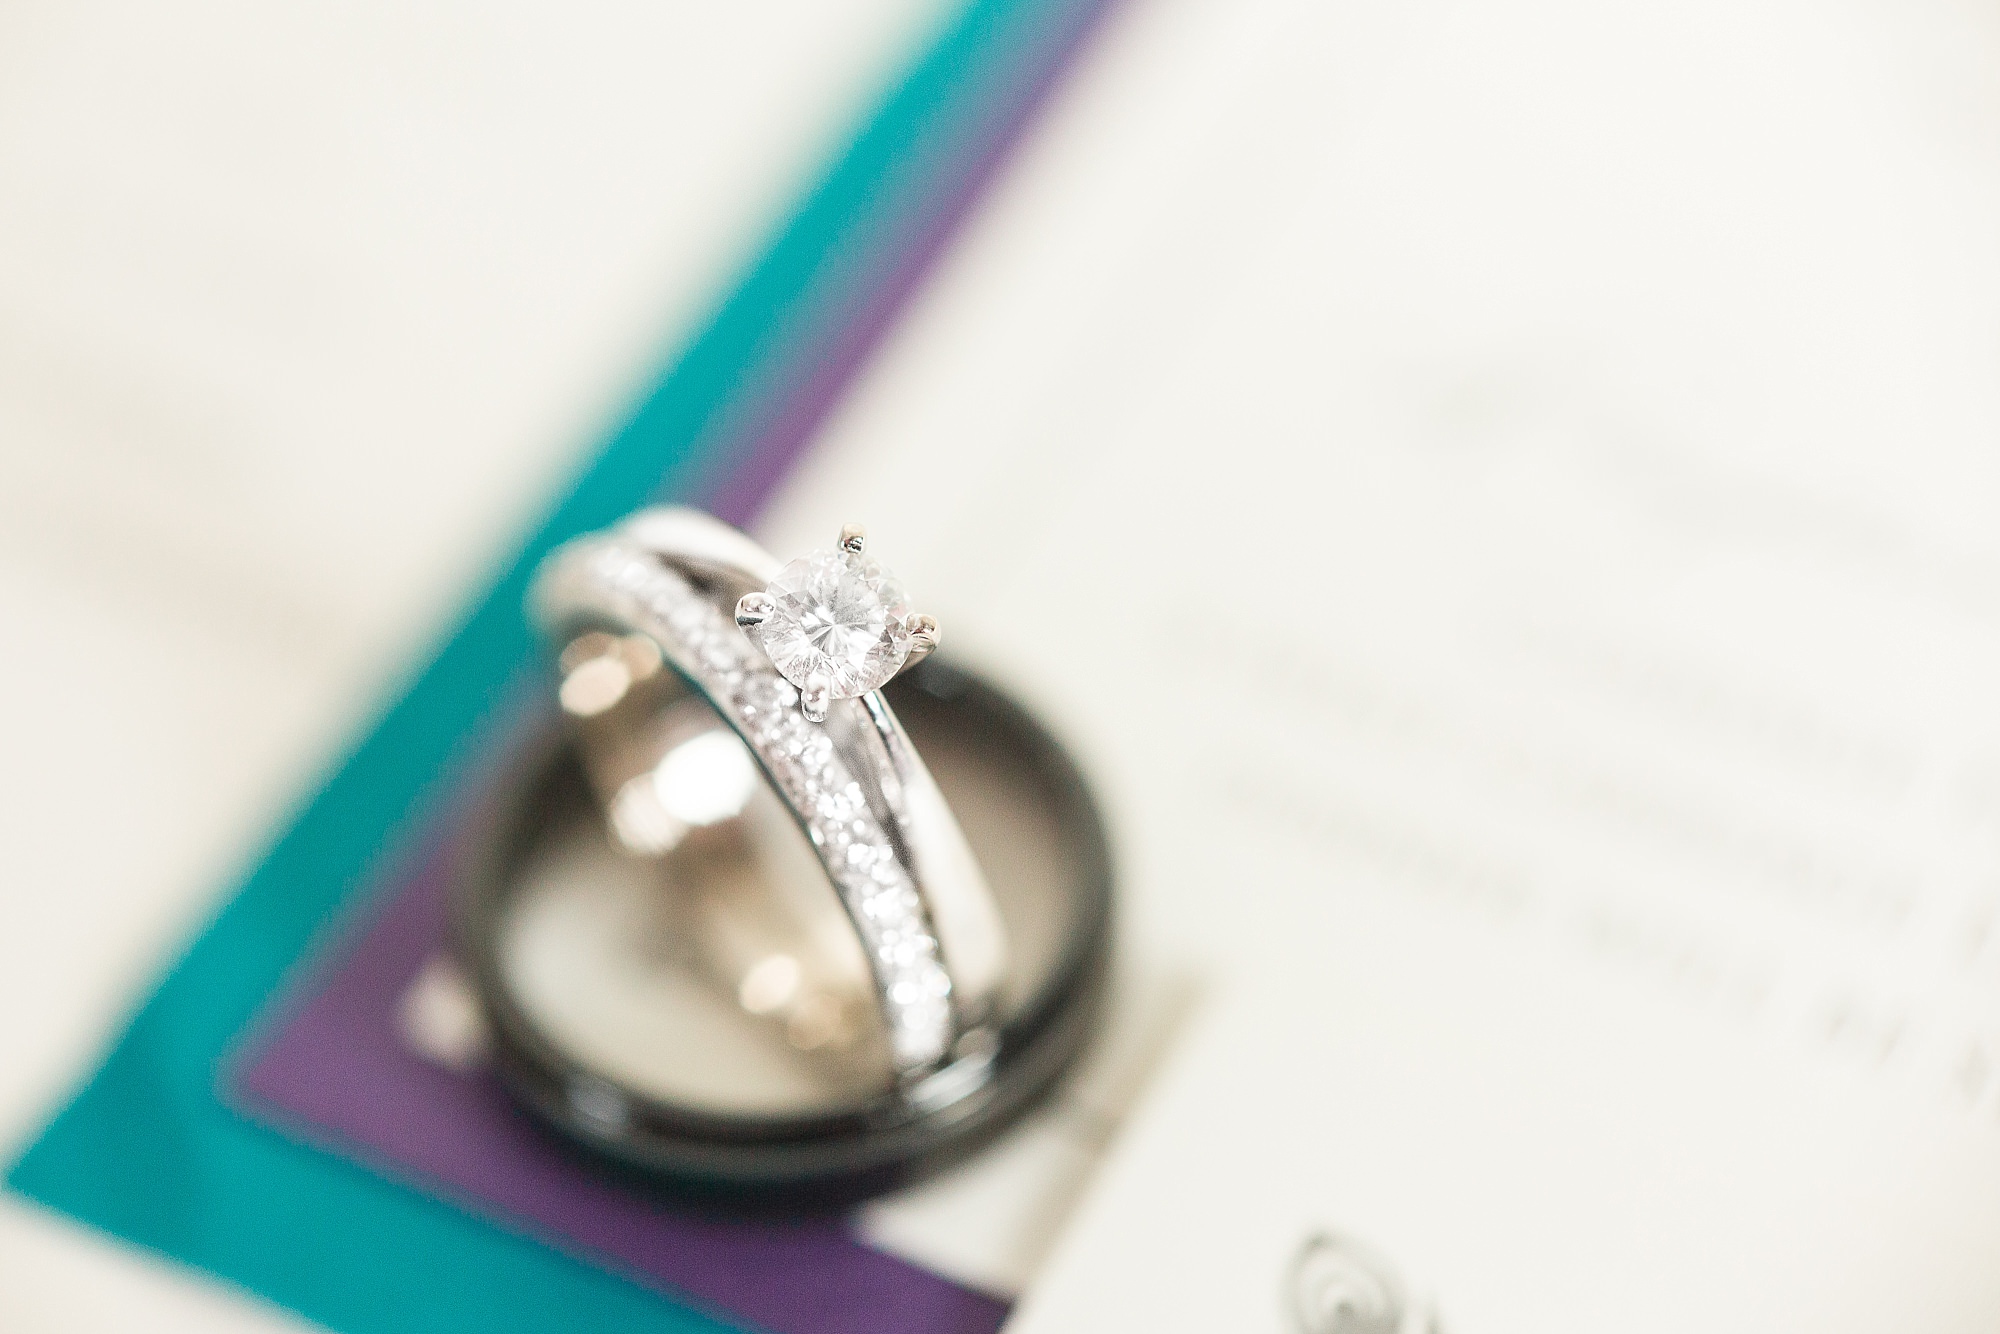 Detail shot of wedding bands on blue and purple wedding invites